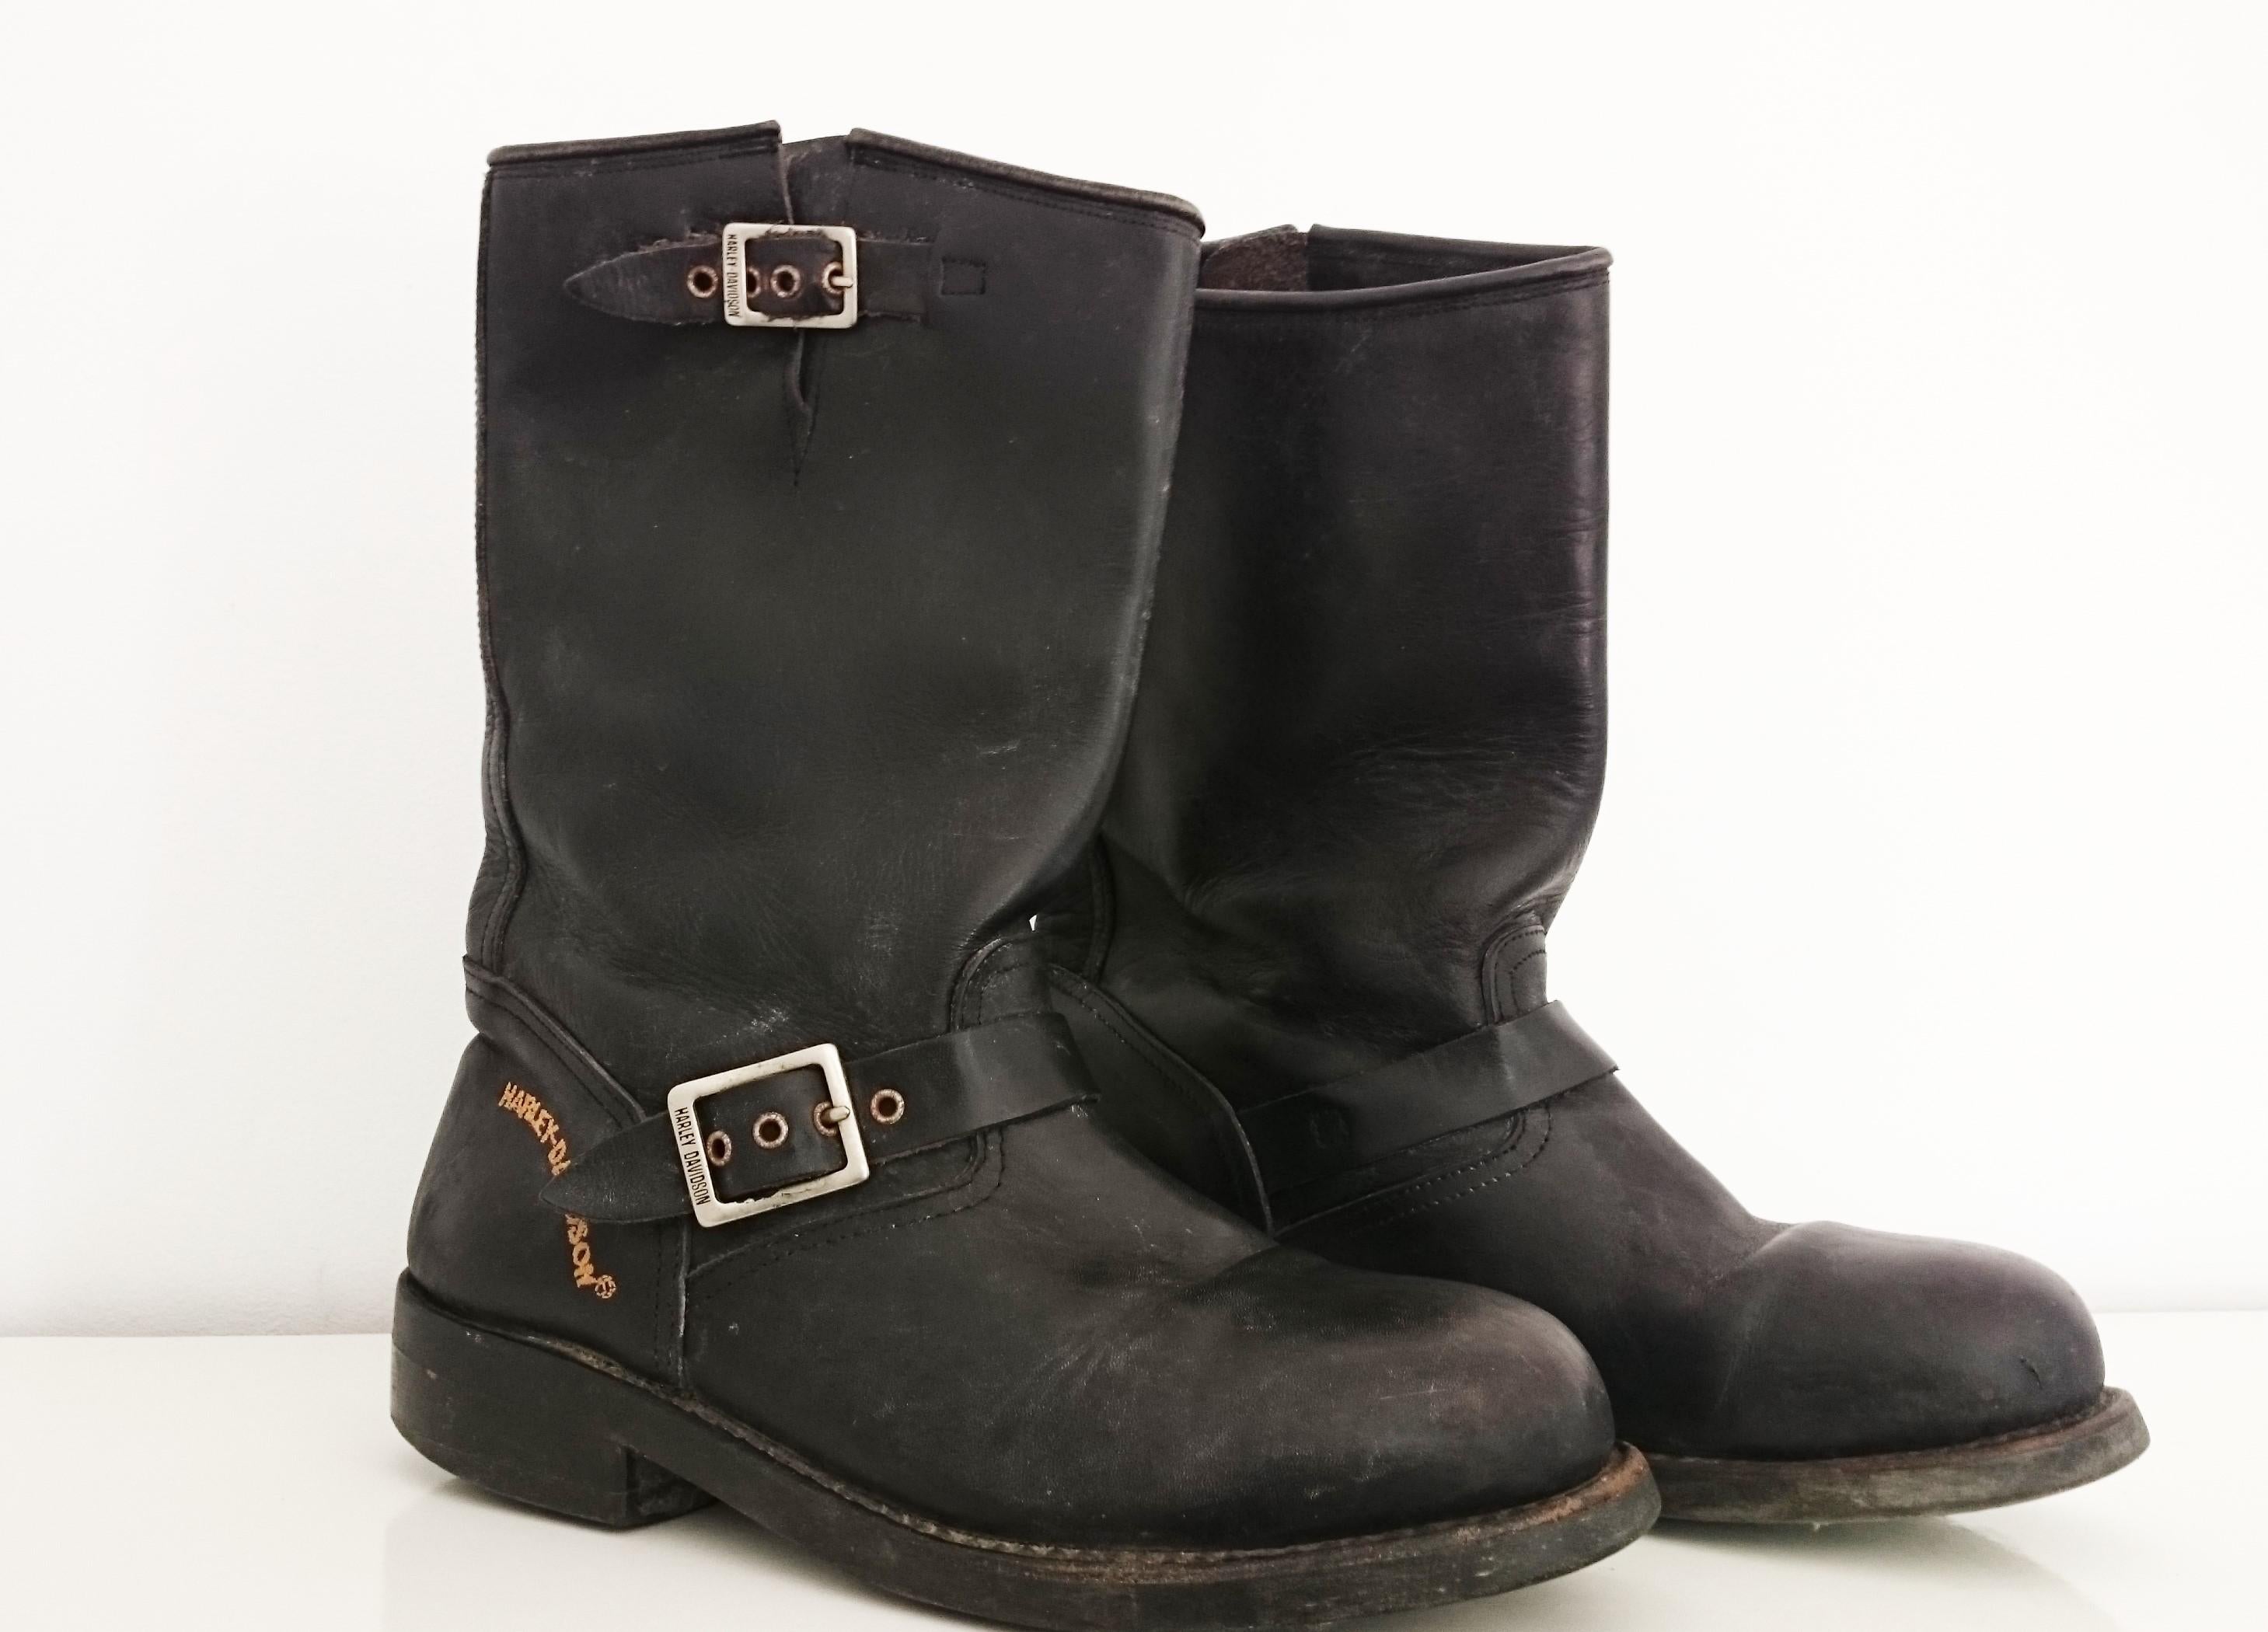 HARLEY DAVIDSON Black Leather Boots. 
Conditions: Used, but still in good condition for further use.
Height: 31 cm
Size 8 (UK)
Made in the USA